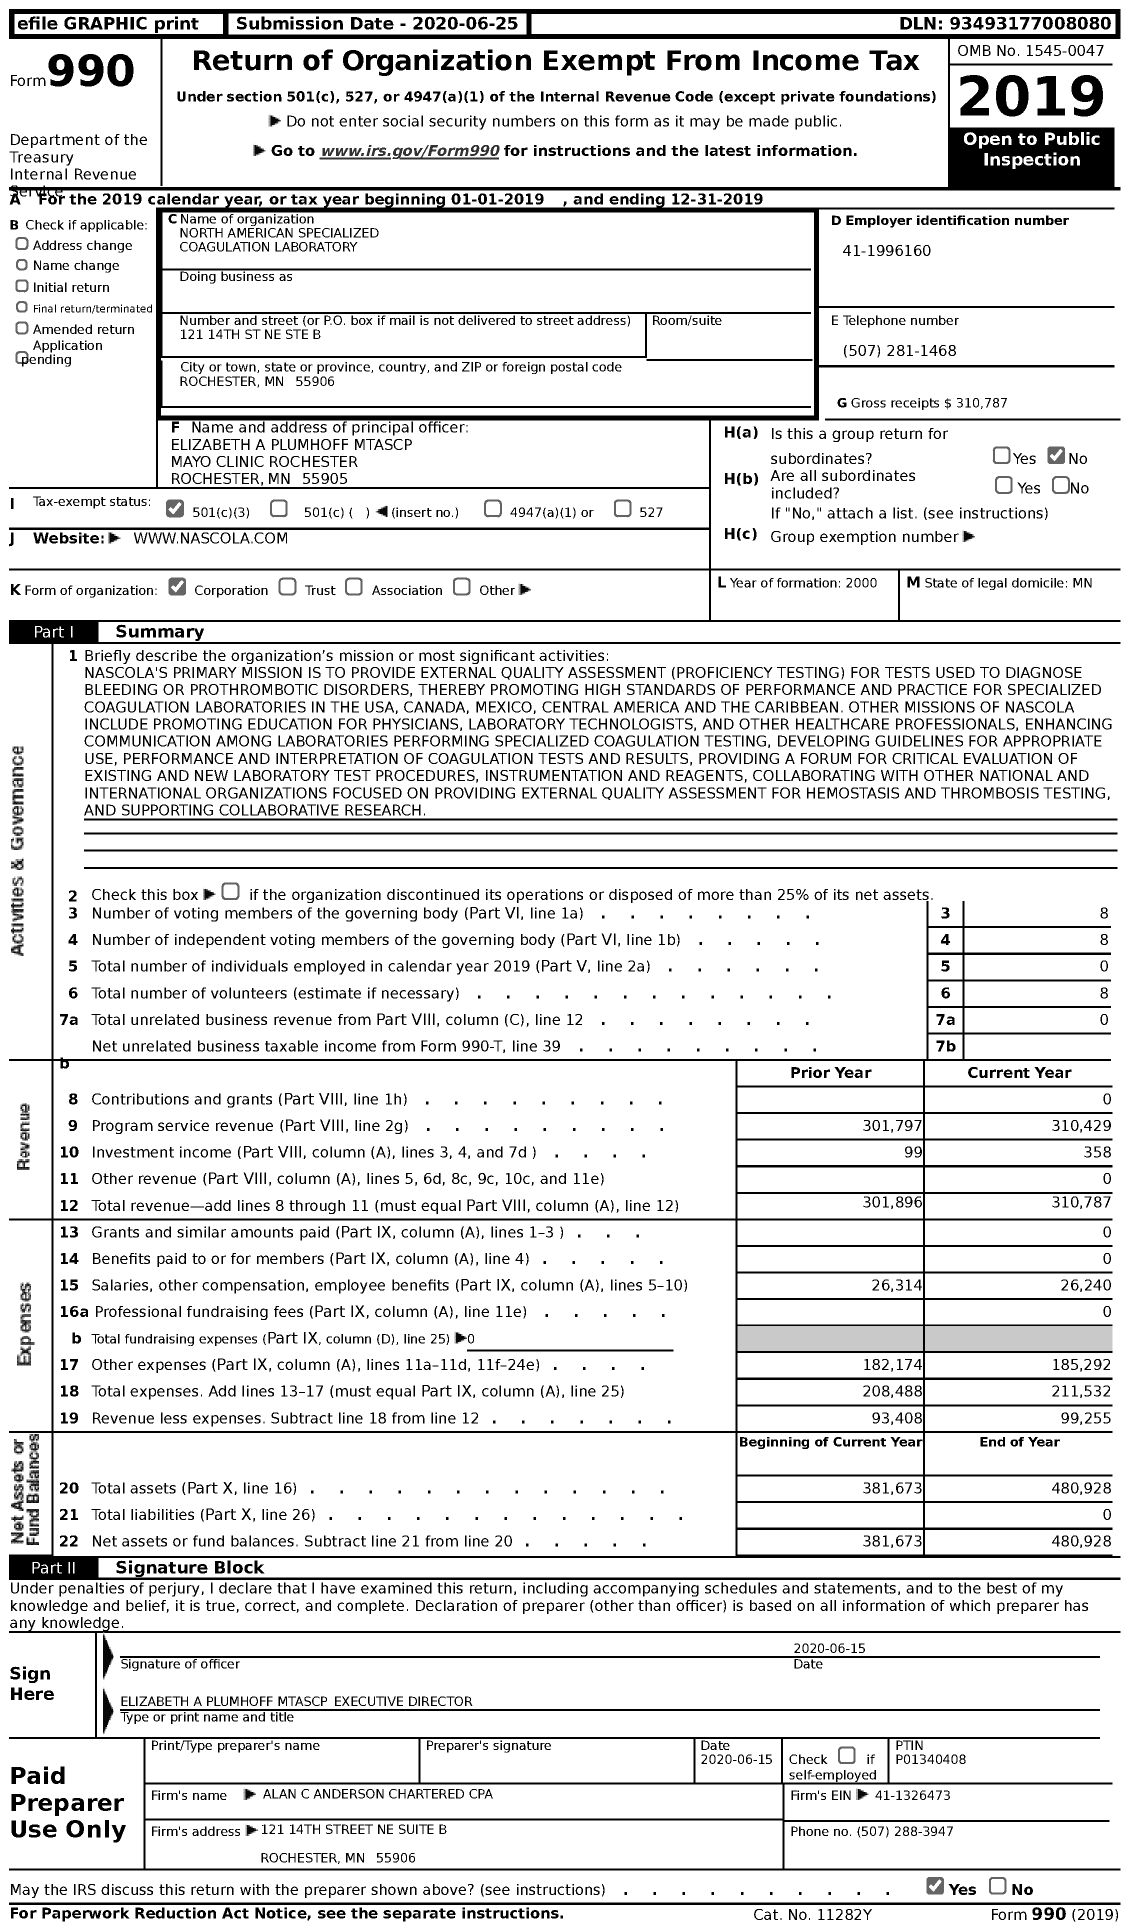 Image of first page of 2019 Form 990 for North American Specialized Coagulation Laboratory